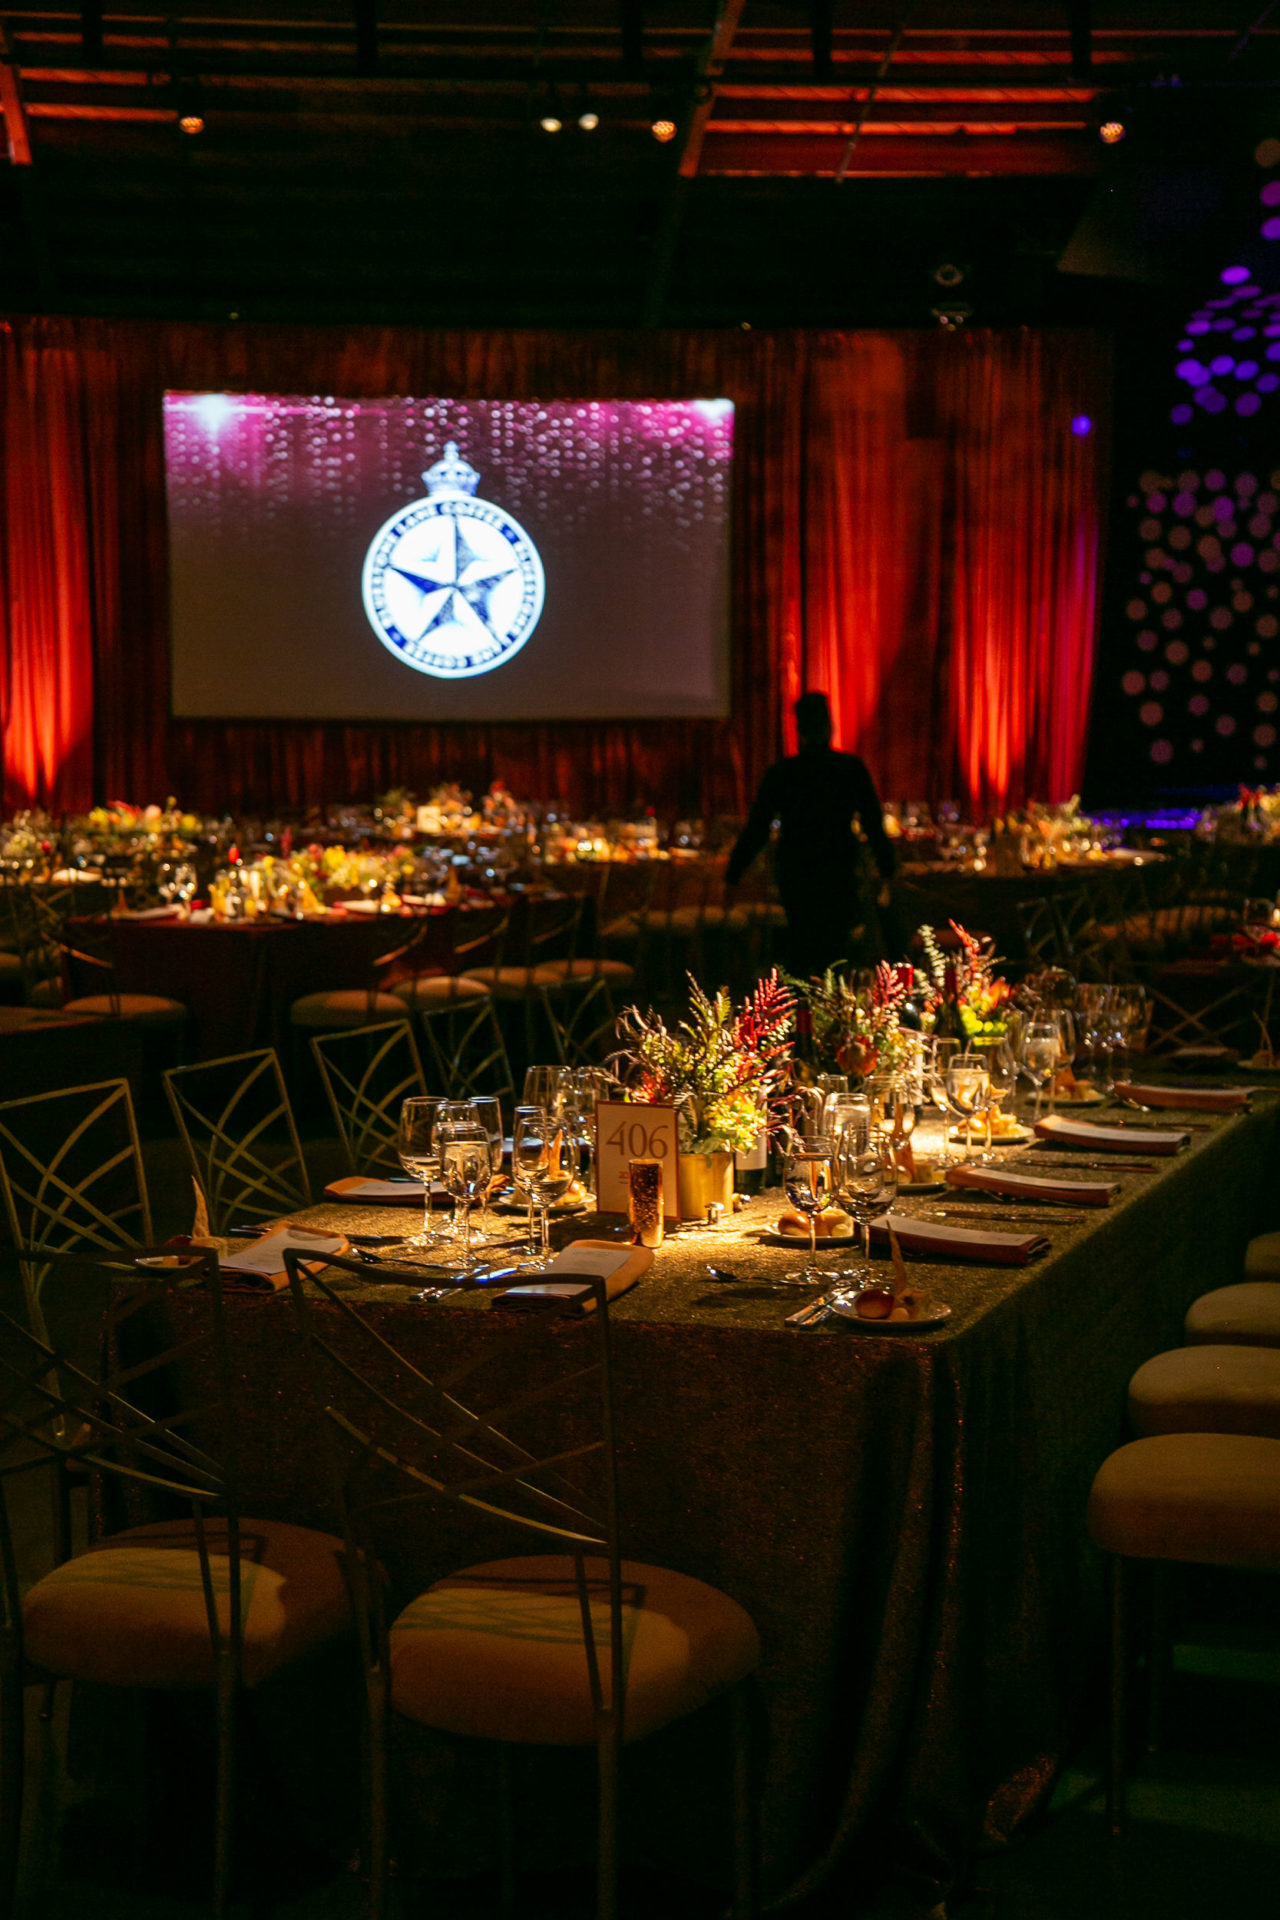 Gala set up with tables set and Bluestone Lane logo on the projector screen